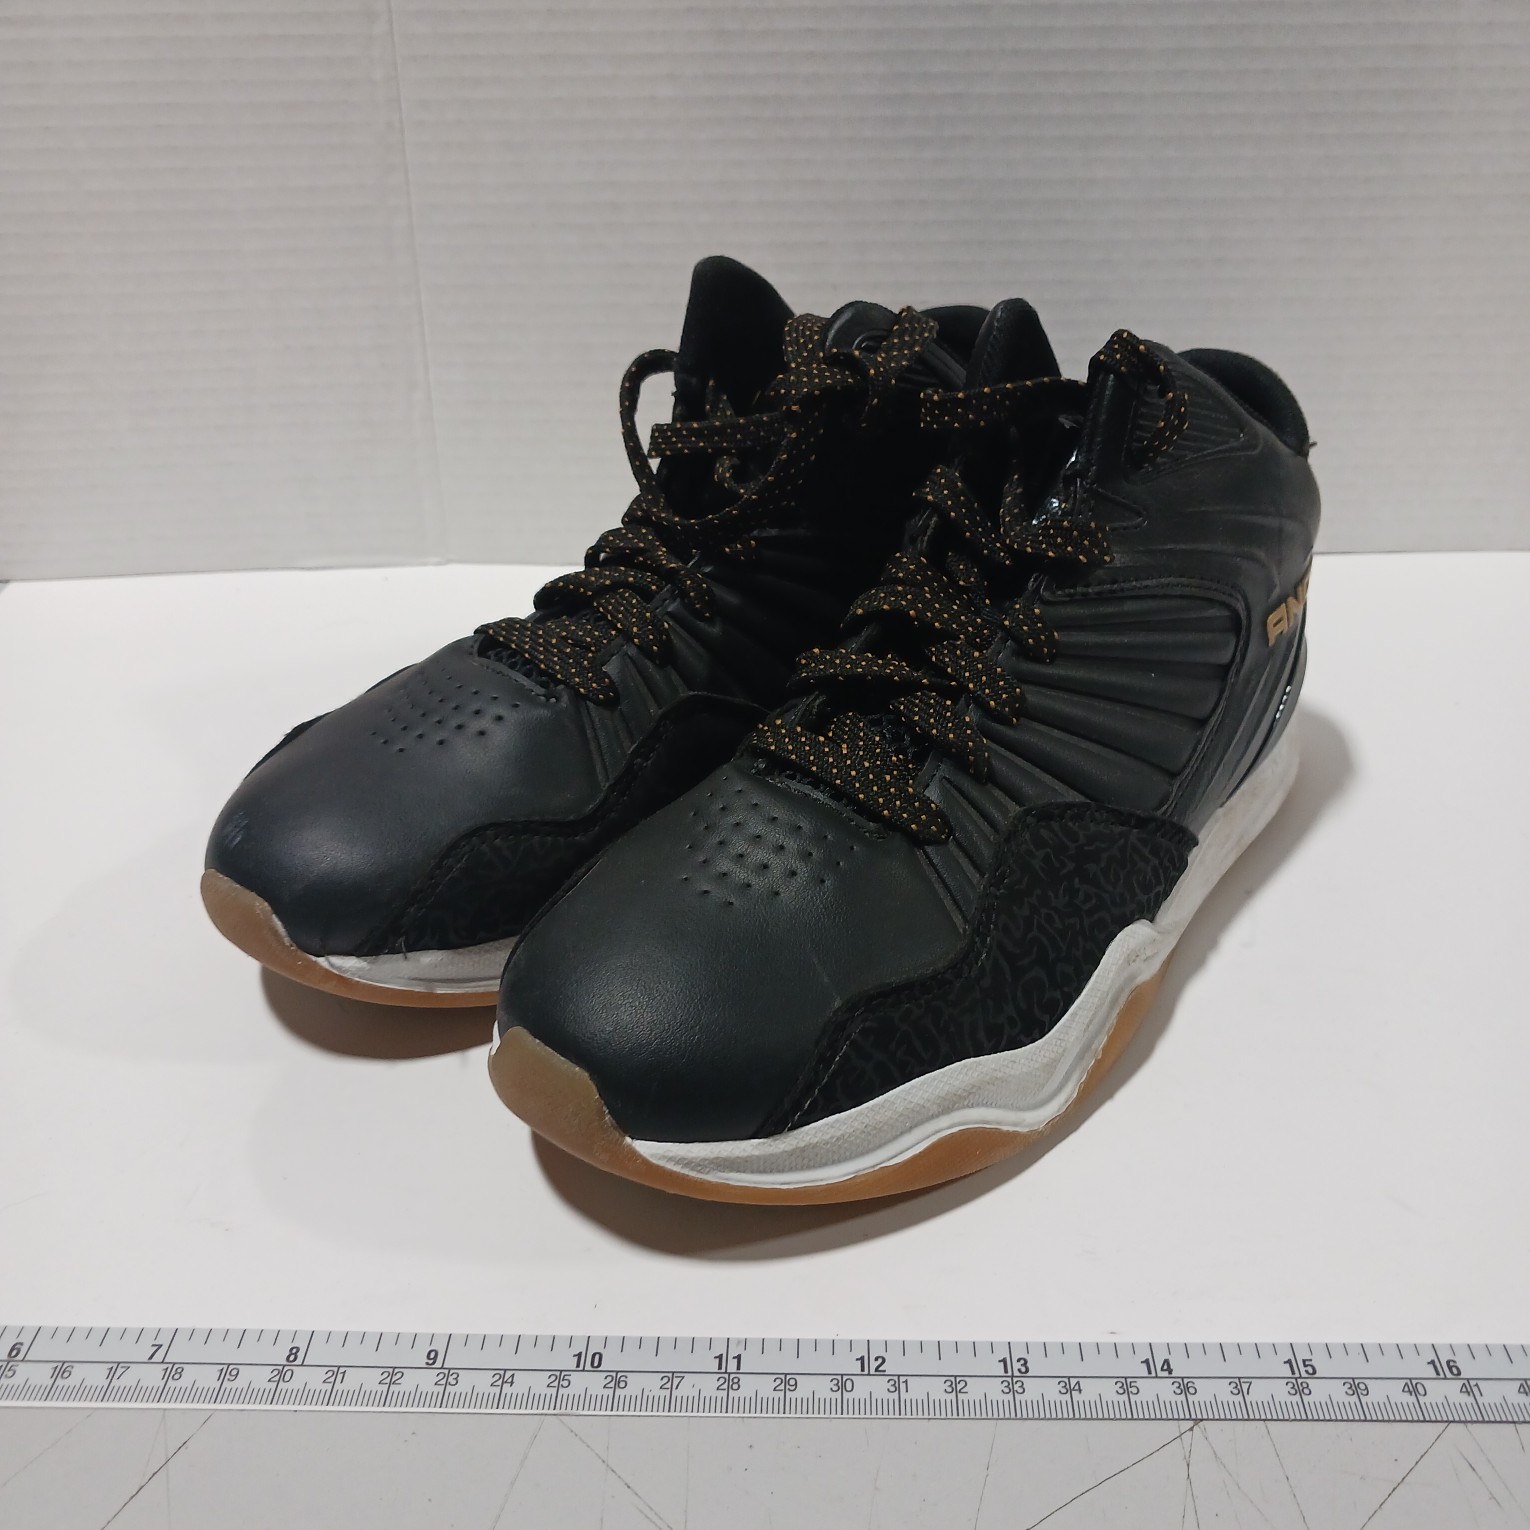 Buy the And 1 Mens Black Leather Lace Up High Top Basketball Shoes Size ...